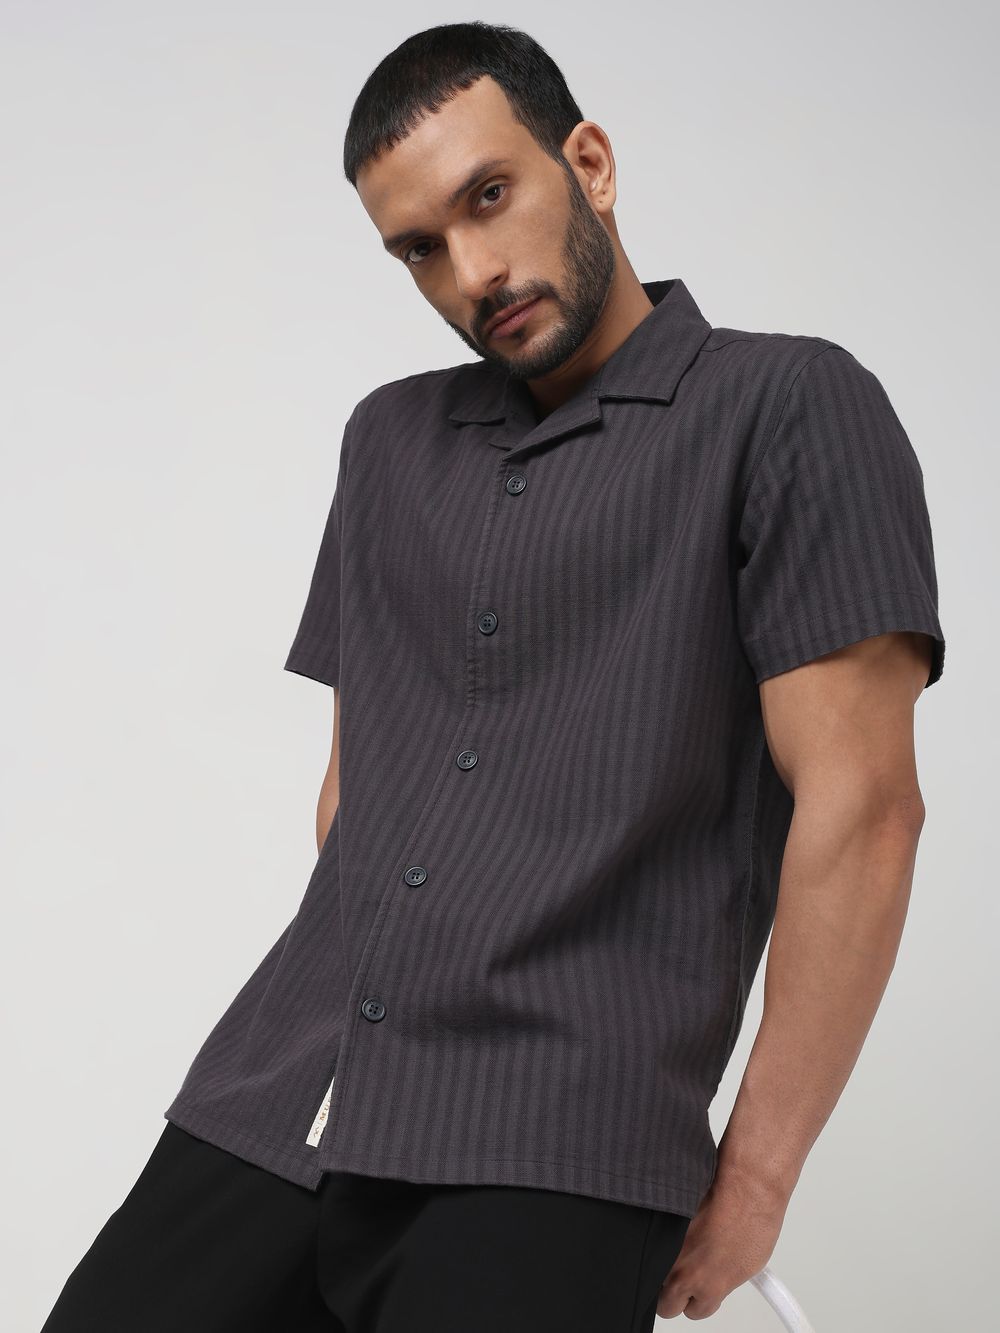 Grey Self-Stripe Plain Relaxed Fit Casual Shirt